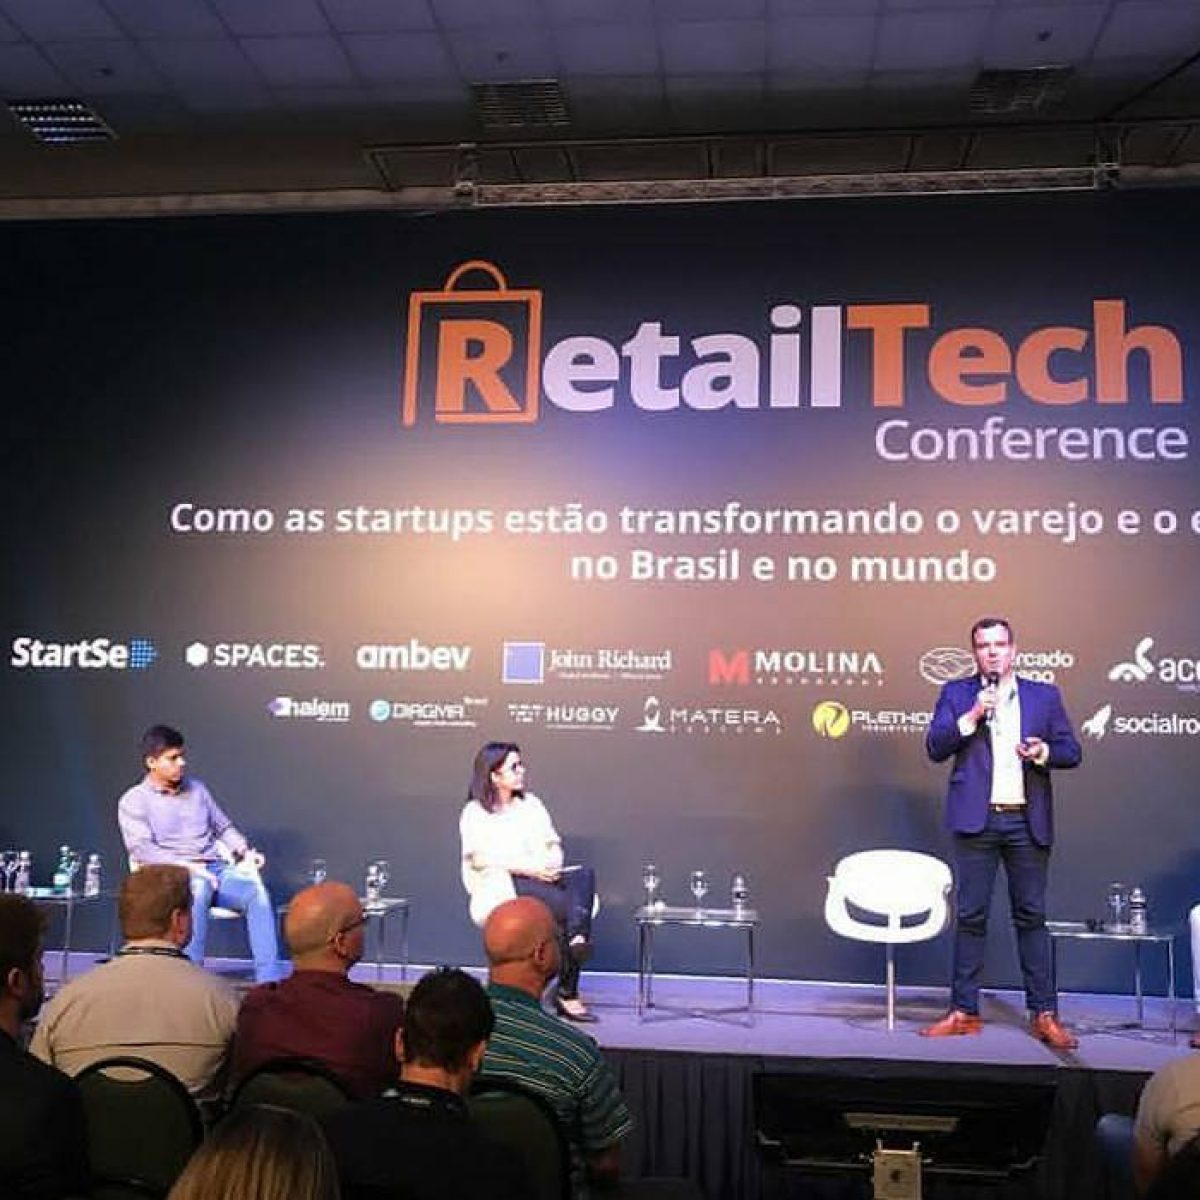 Retail Tech Conference